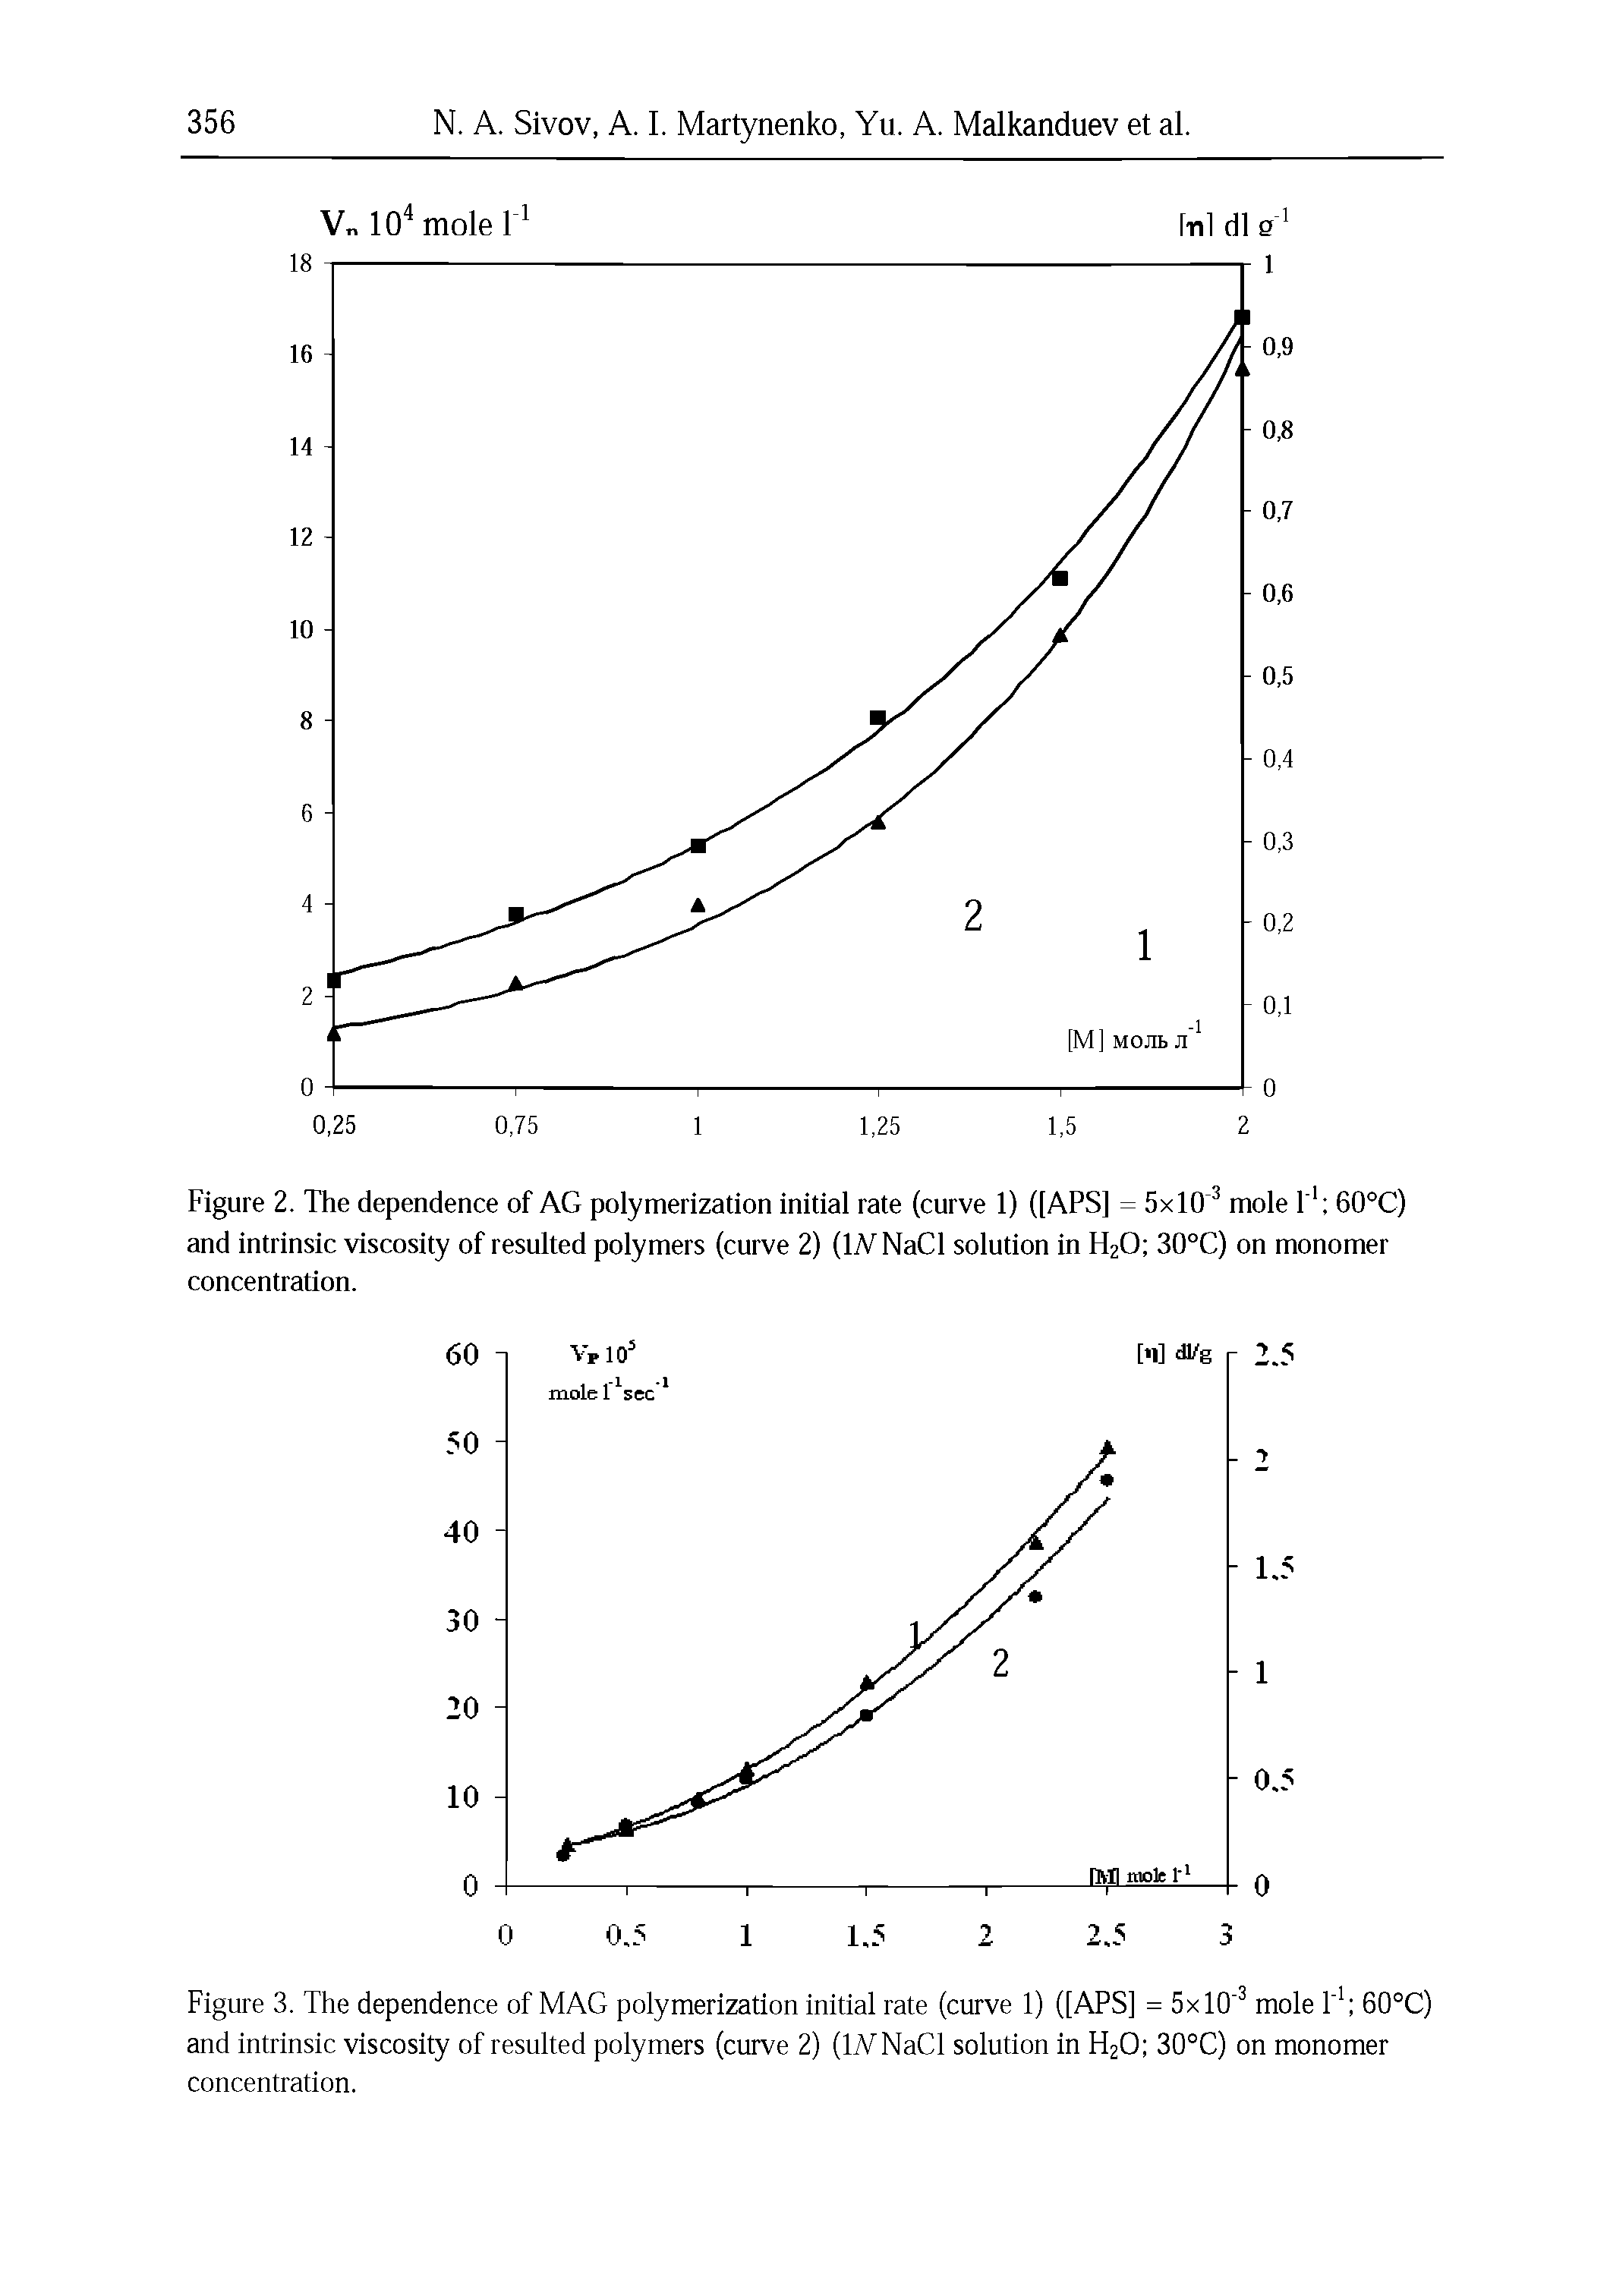 Figure 2. The dependence of AG polymerization initial rate (curve 1) ([APS] = 5x103 mole l 1 60°C) and intrinsic viscosity of resulted polymers (curve 2) (LVNaCl solution in ff20 30°C) on monomer concentration.